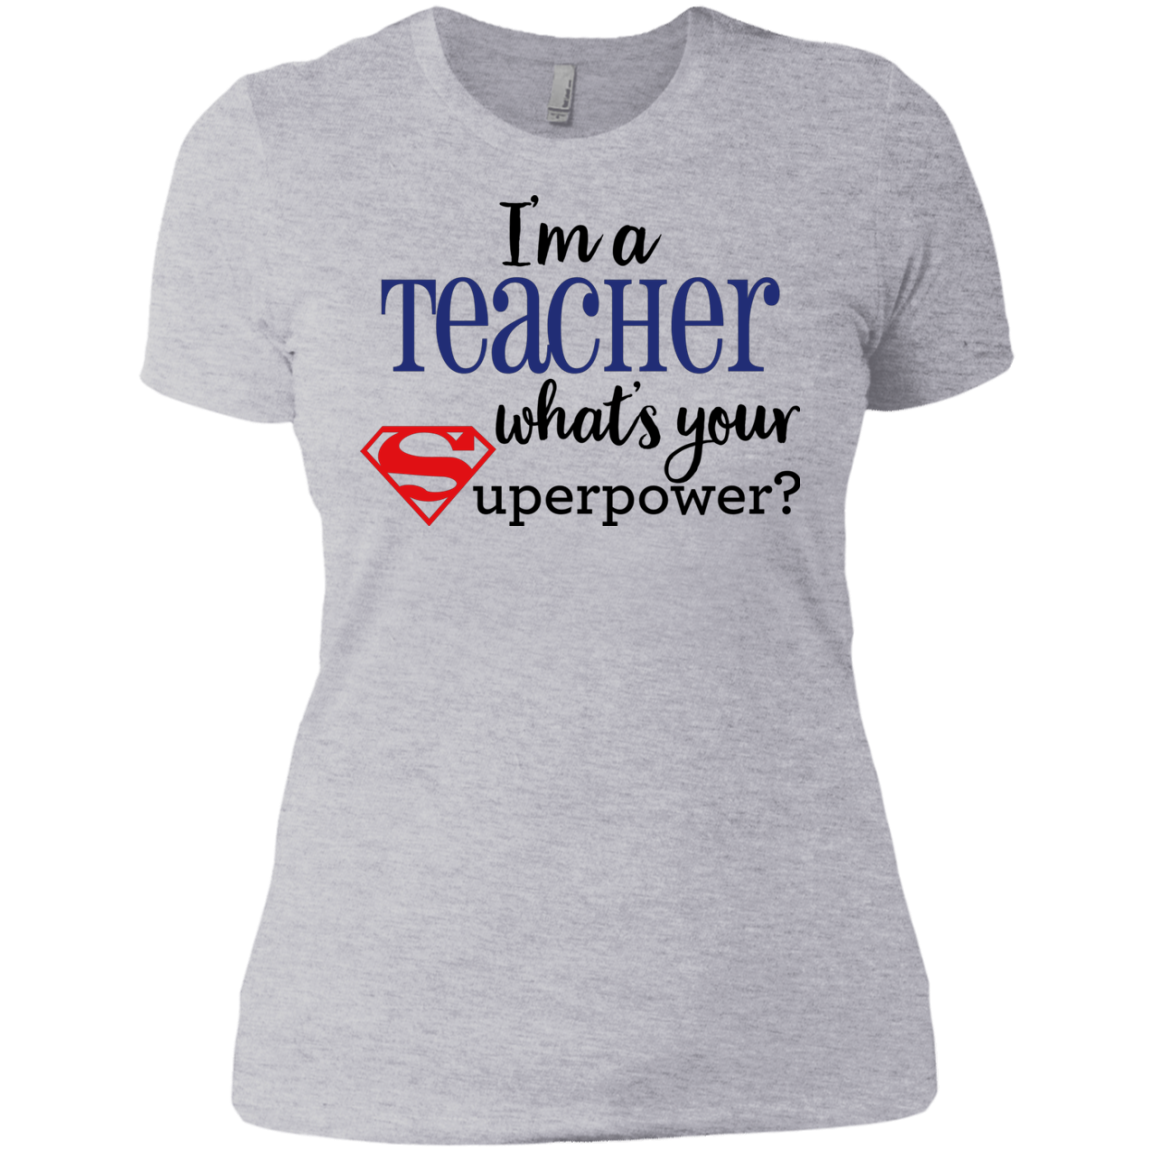 I'm a Teacher What's your Superpower?